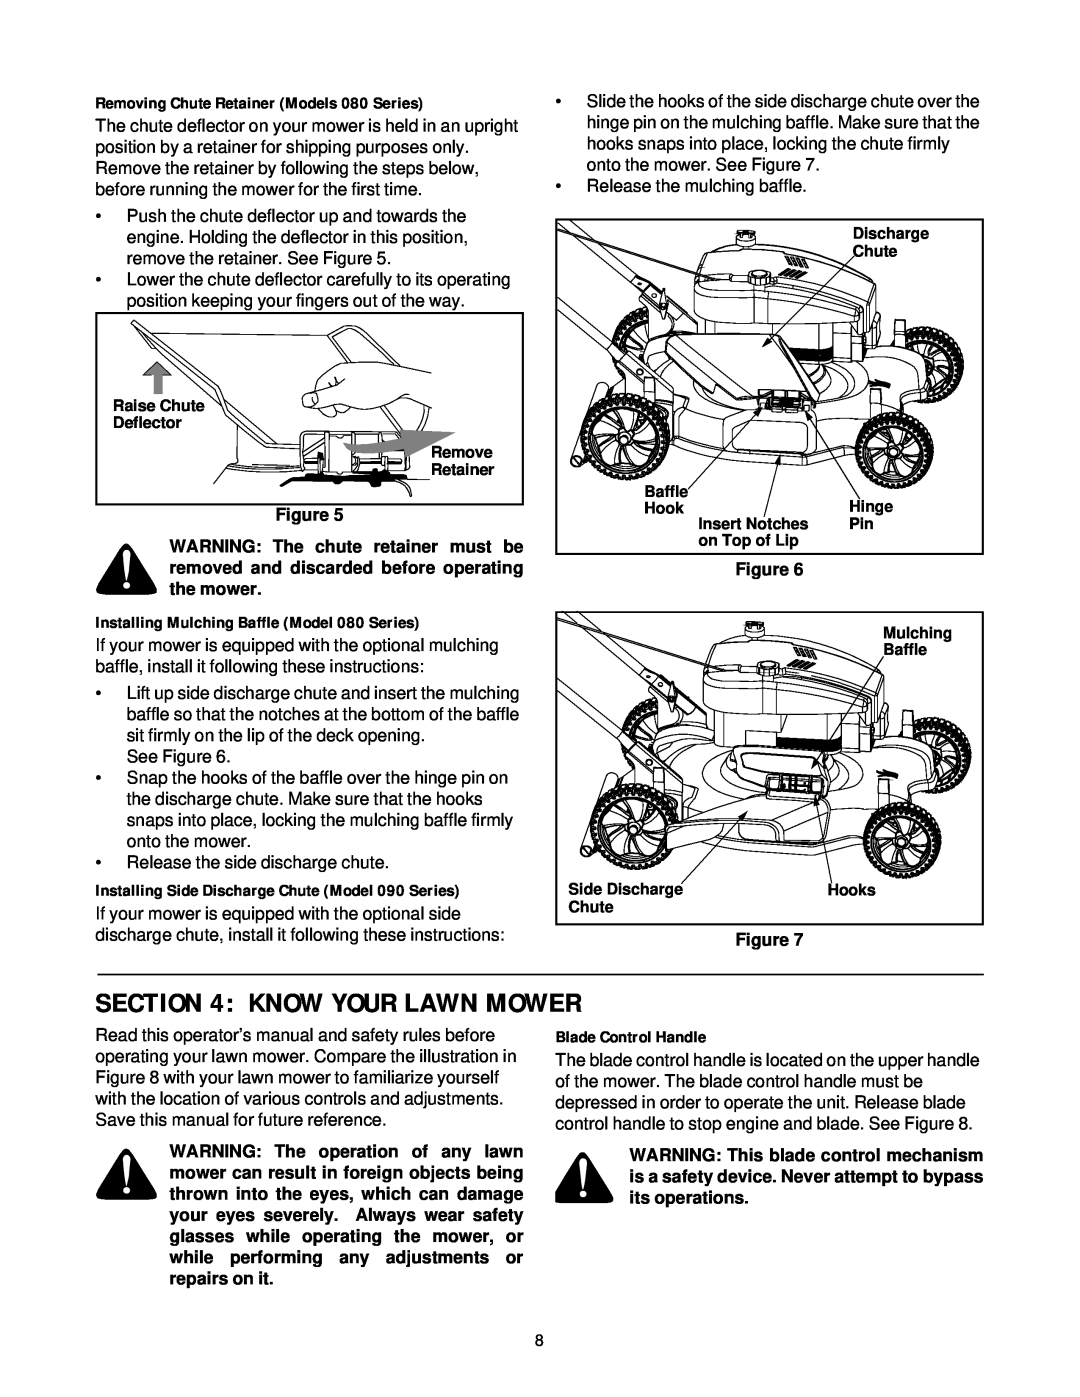 MTD 080 Thru 099 manual Know Your Lawn Mower, Removing Chute Retainer Models 080 Series, Blade Control Handle 